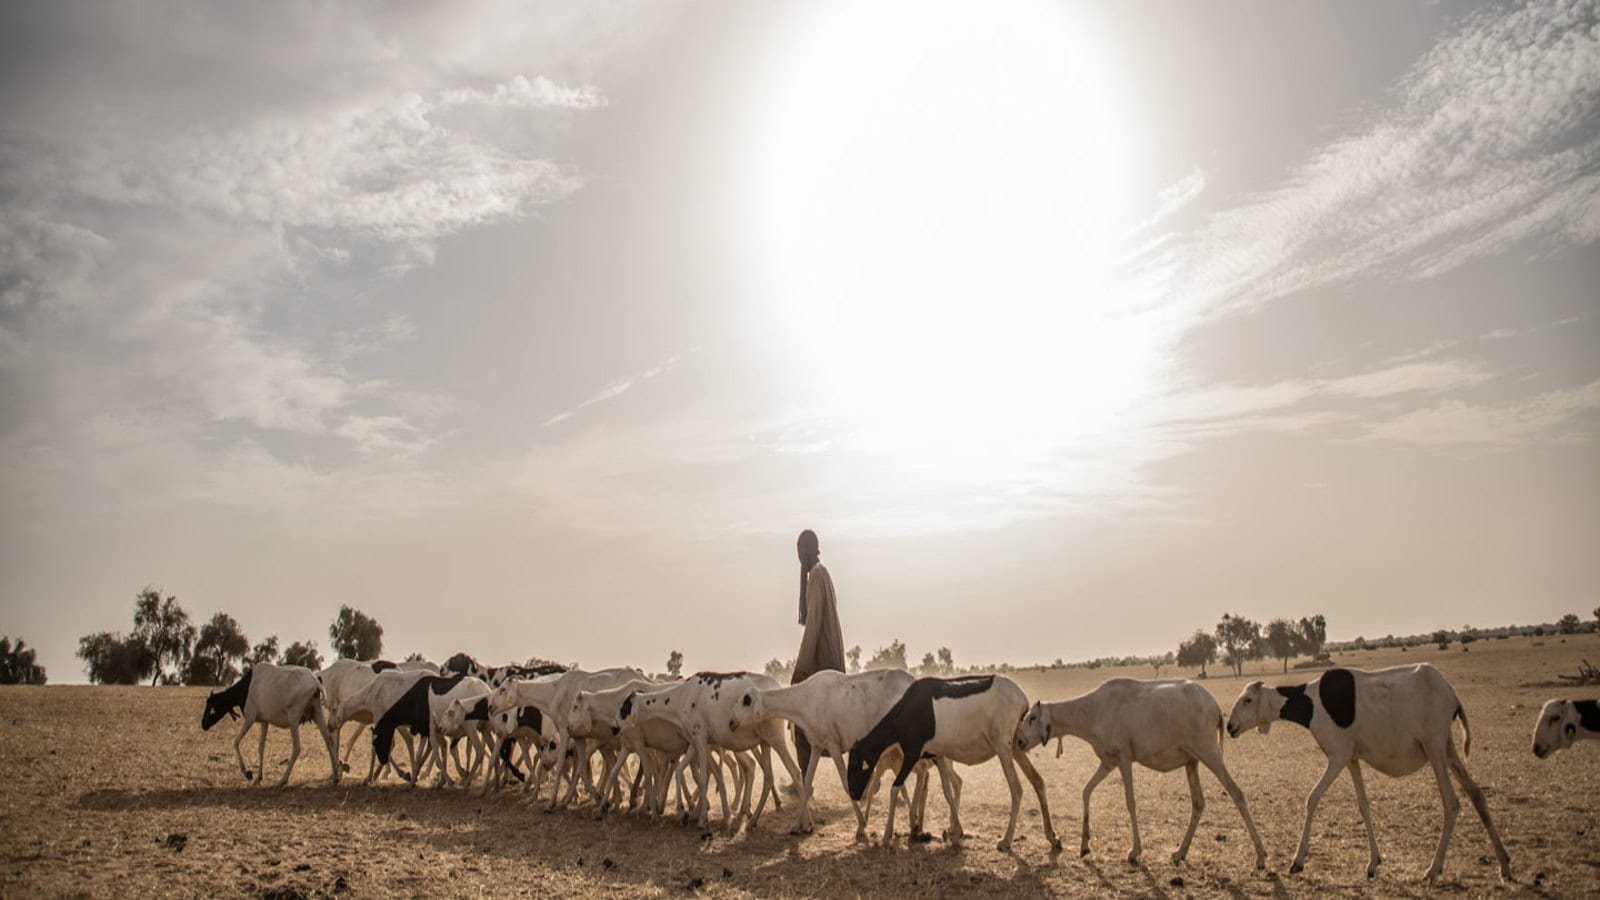 World Bank issues US$375m financing to revitalize pastoralism in the Sahel region